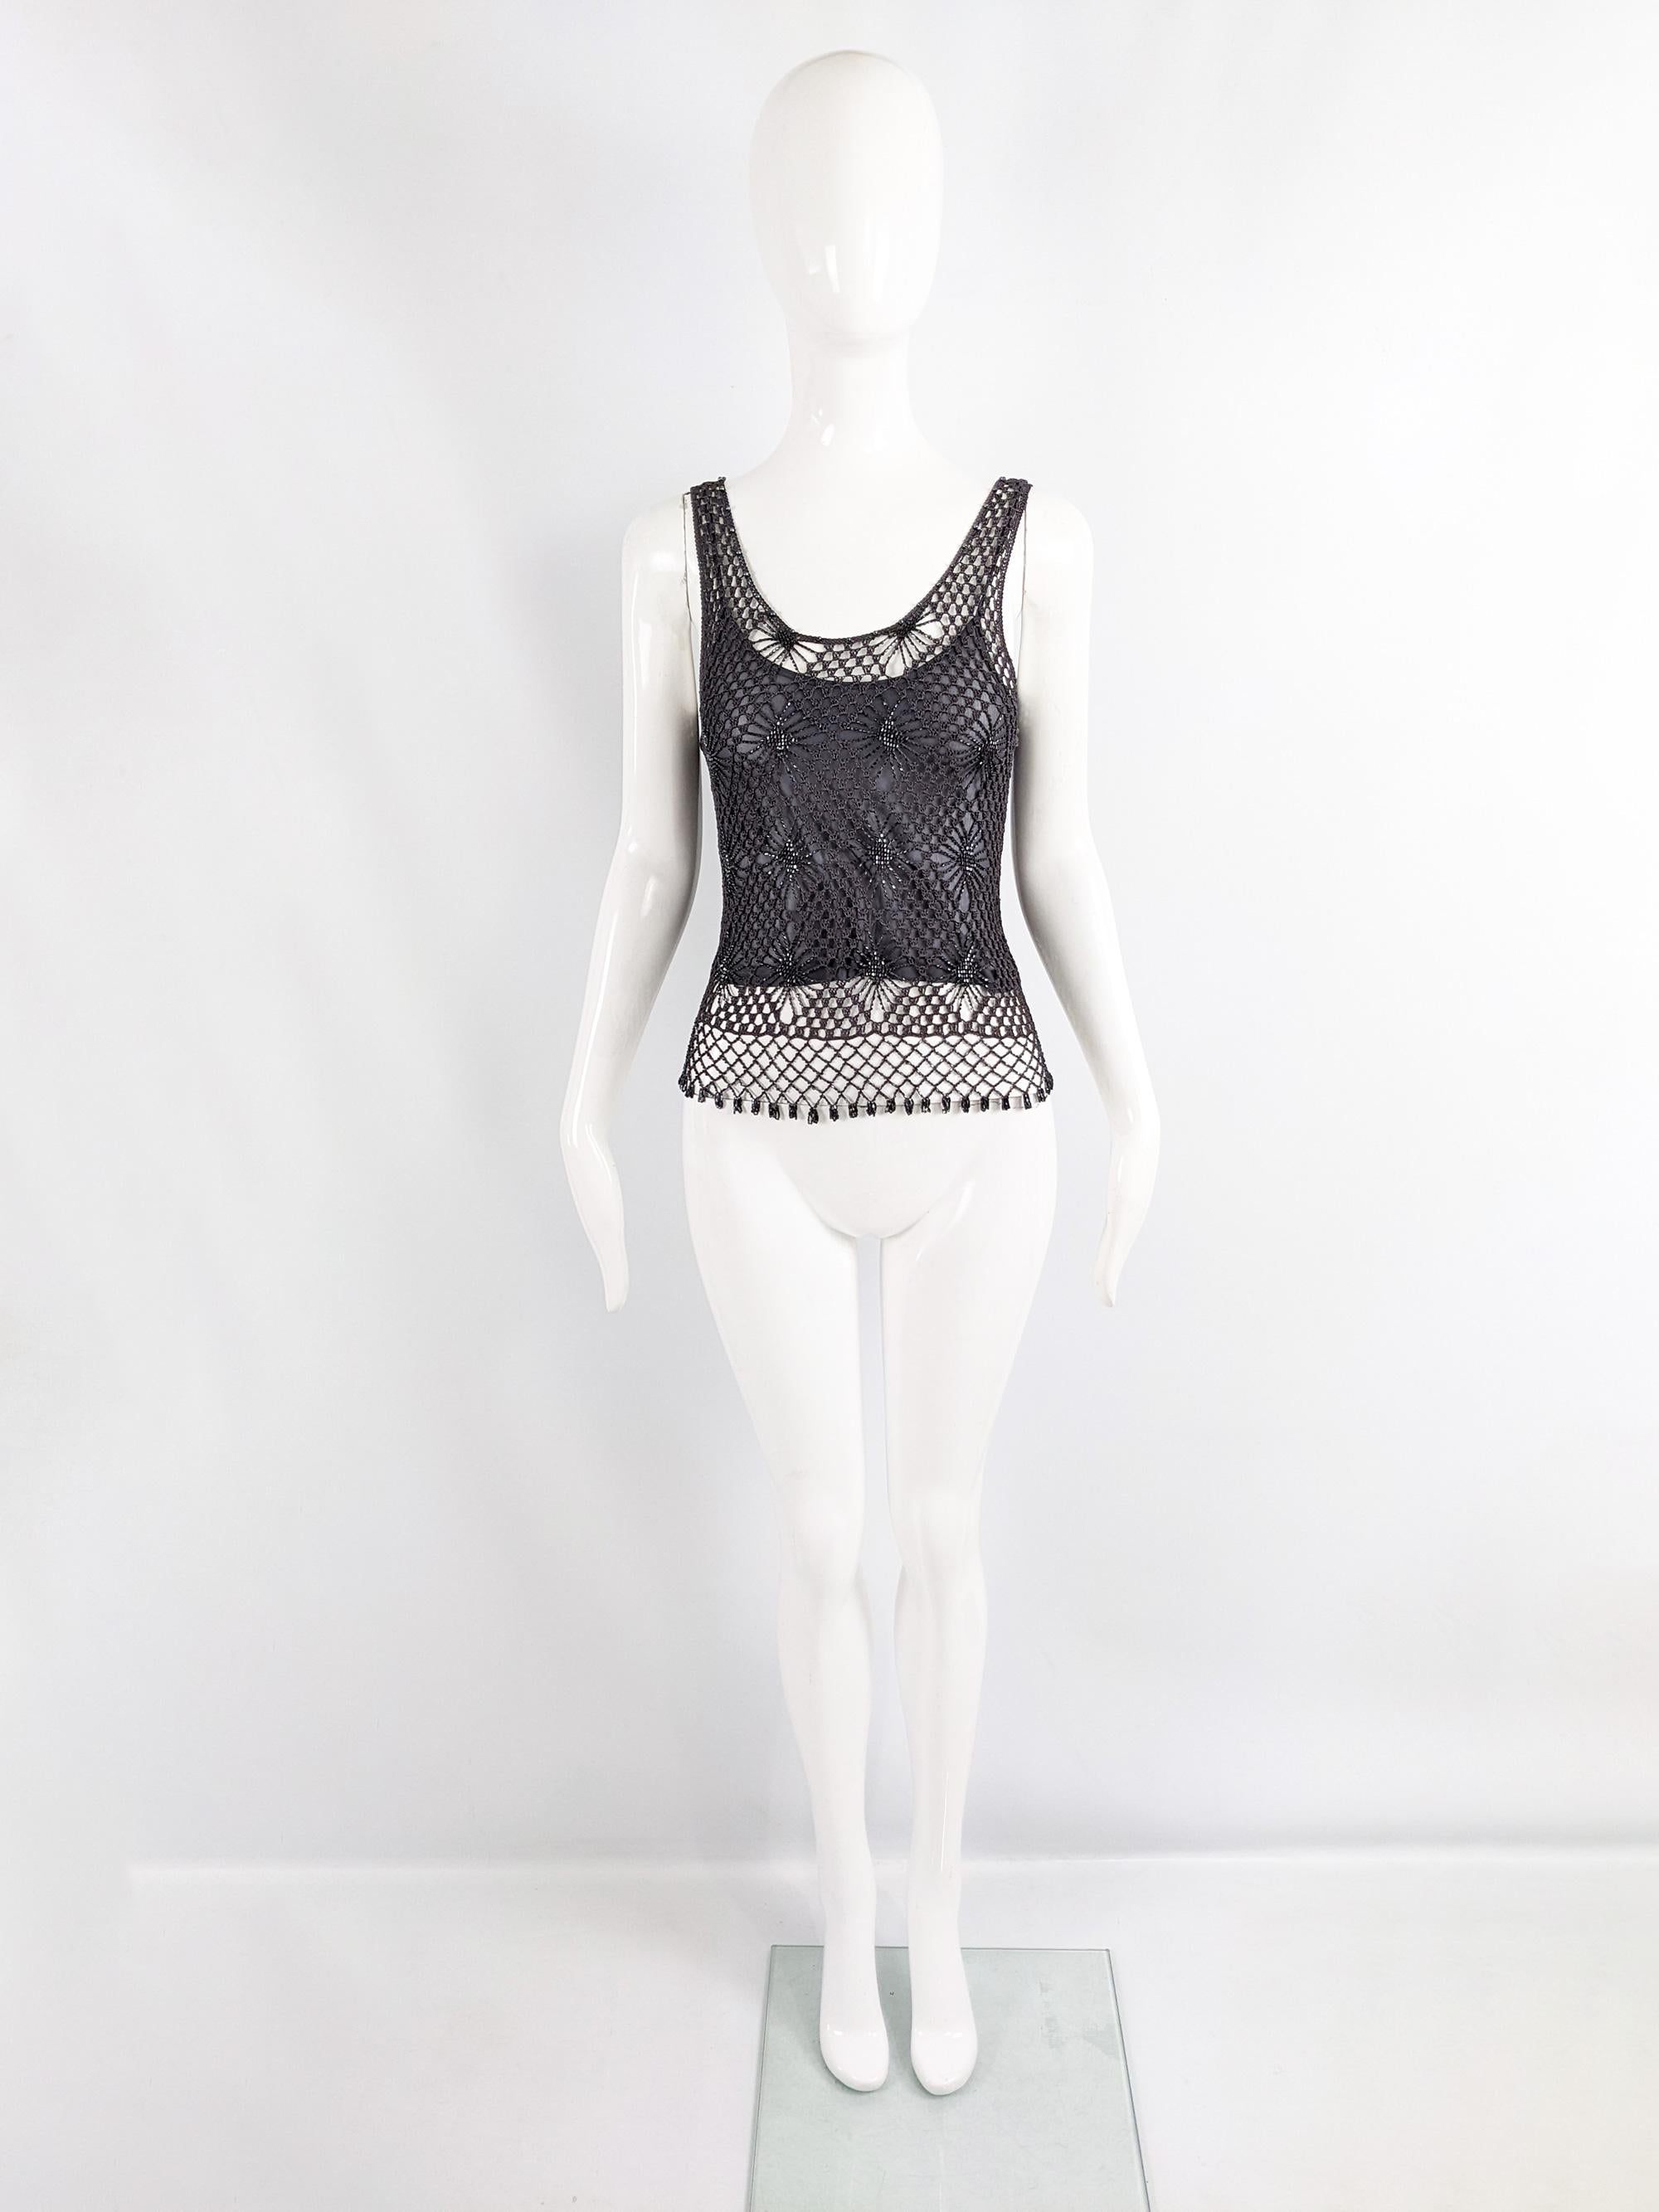 A fabulous vintage womens sleeveless top from the late 90s / early 2000s by luxury British fashion designer, Ronit Zilkha. In a dark slate grey crochet fabric with beading throughout. Underneath the crochet is a sheer mesh crop top.

Size: